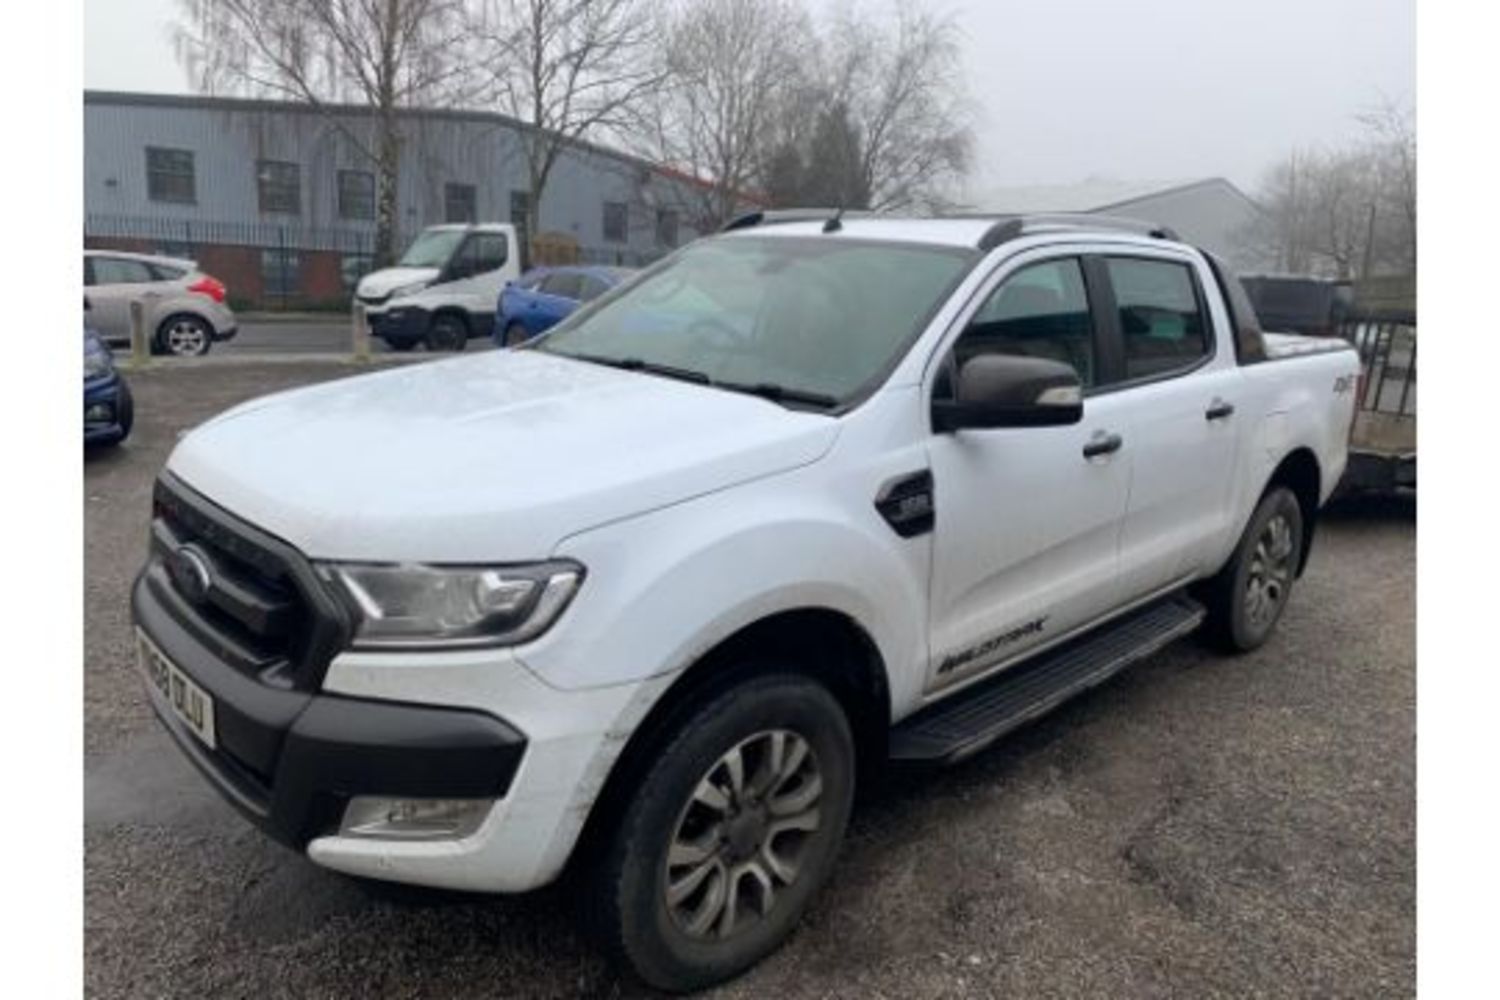 VEHICLE SALE | 2 x Ford Rangers - 67 & 68 Plate | Ends 10 February 2021